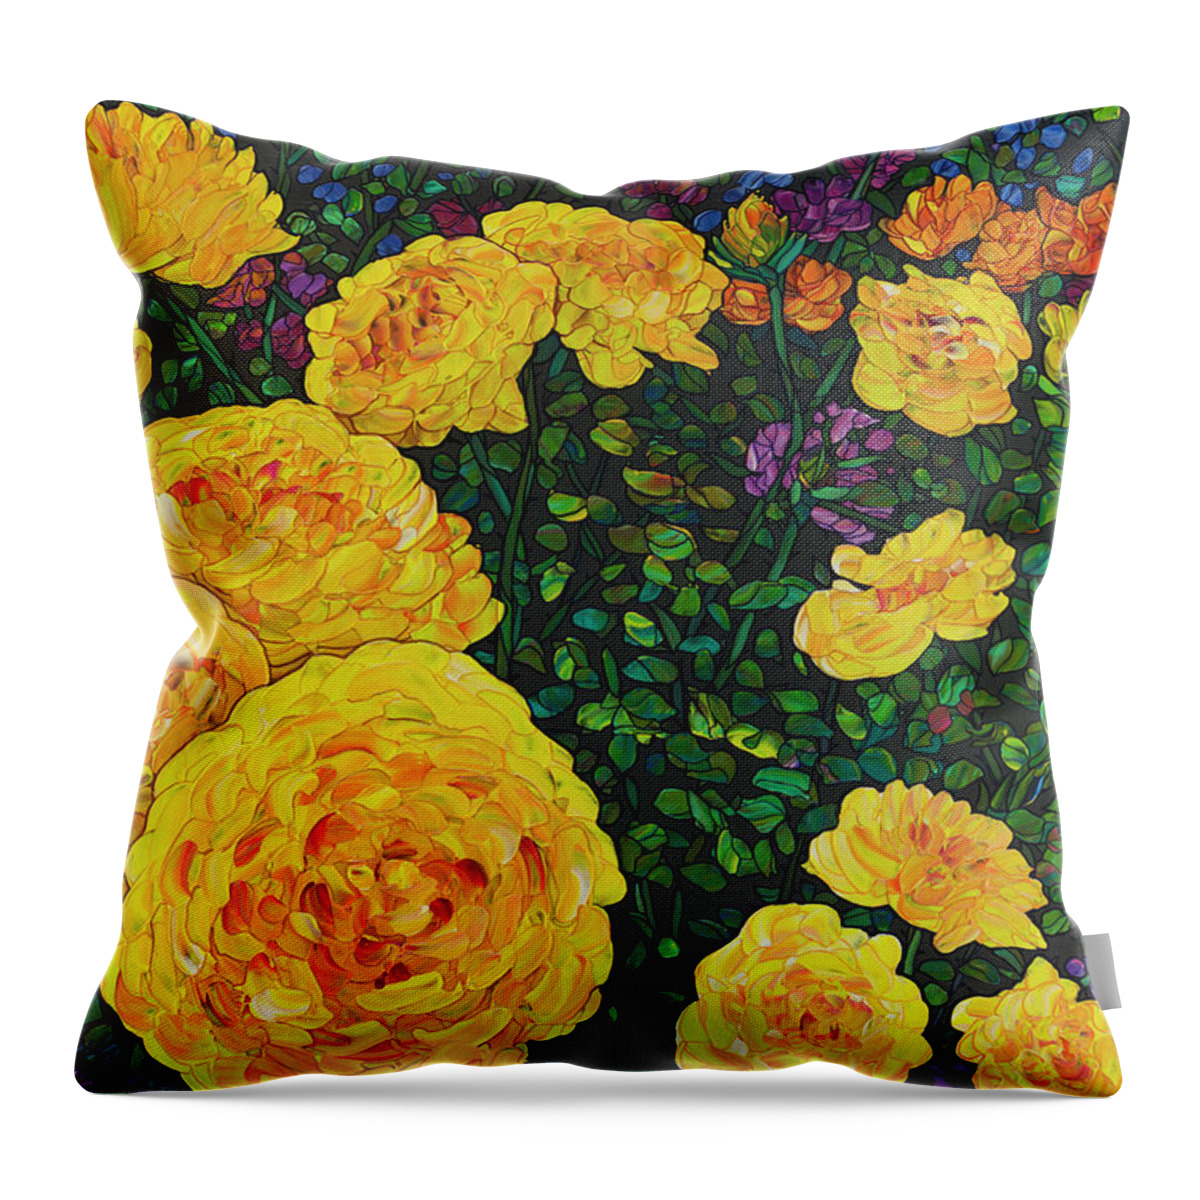 Flowers Throw Pillow featuring the painting Floral Interpretation - Rosebush by James W Johnson